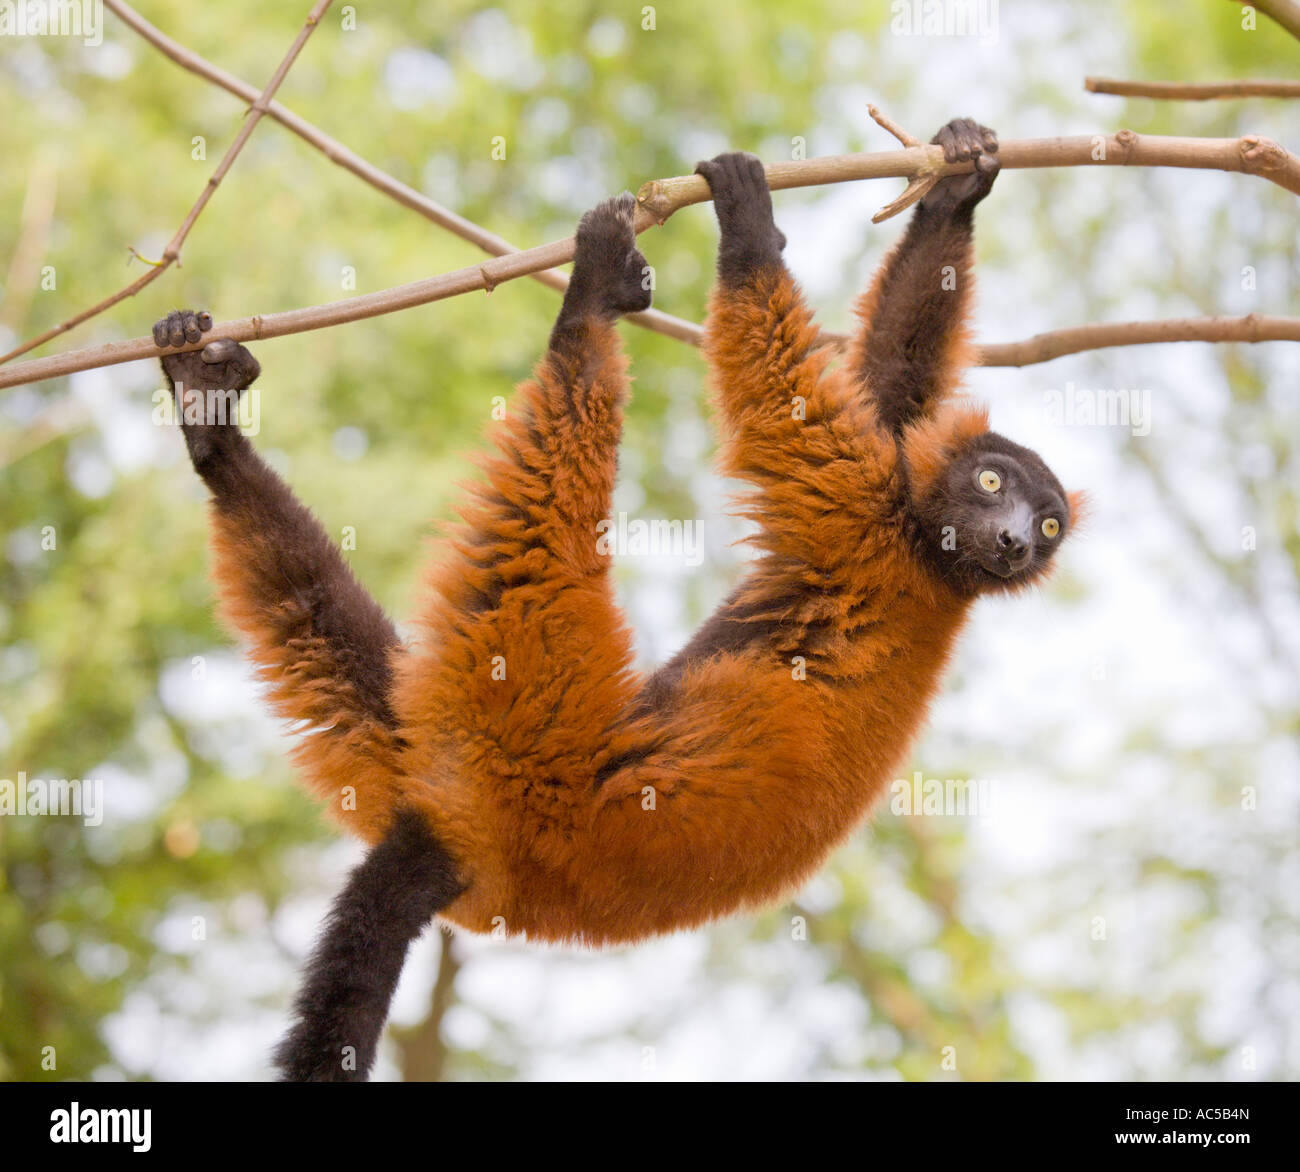 A ruffed lemur (Varecia variegata rubra) scrambling about in the branches of a tree Stock Photo